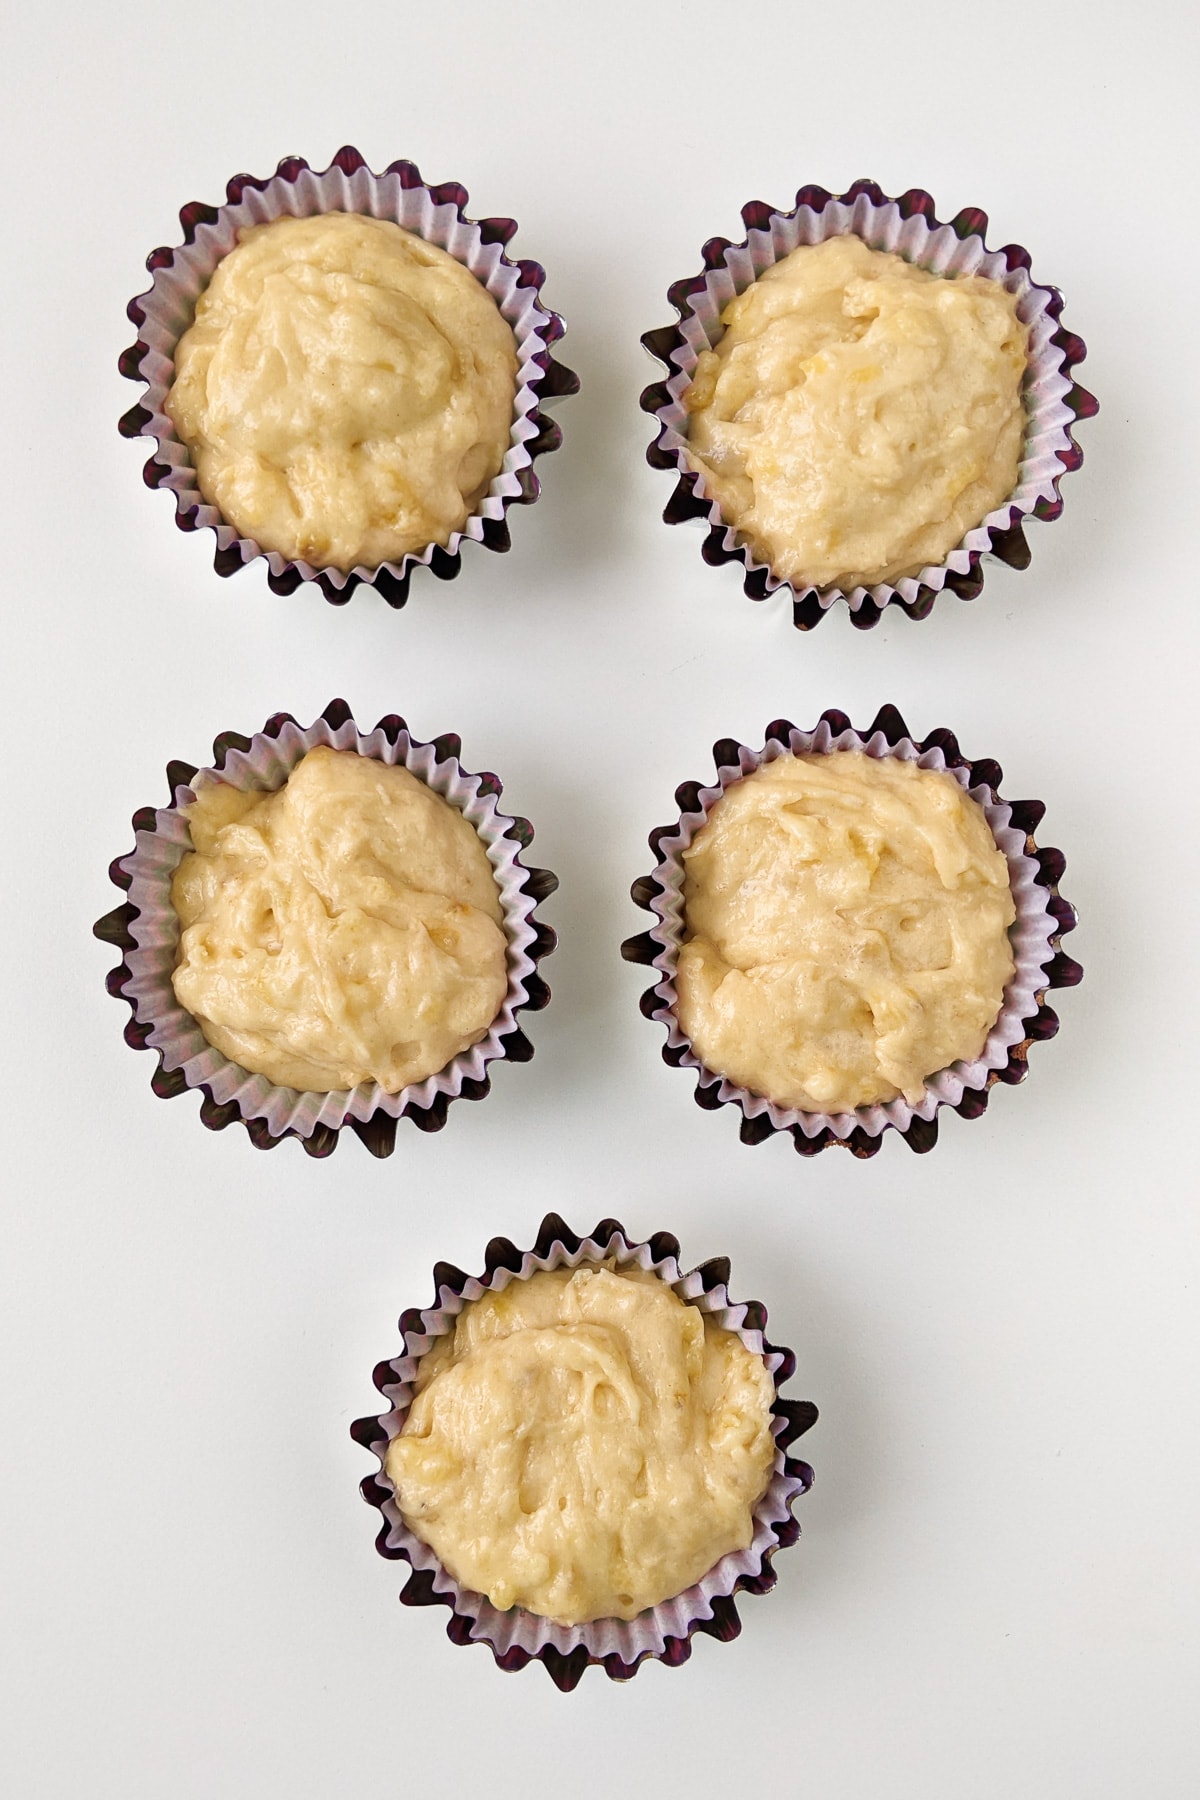 Top view of 5 banana muffins on a white table.